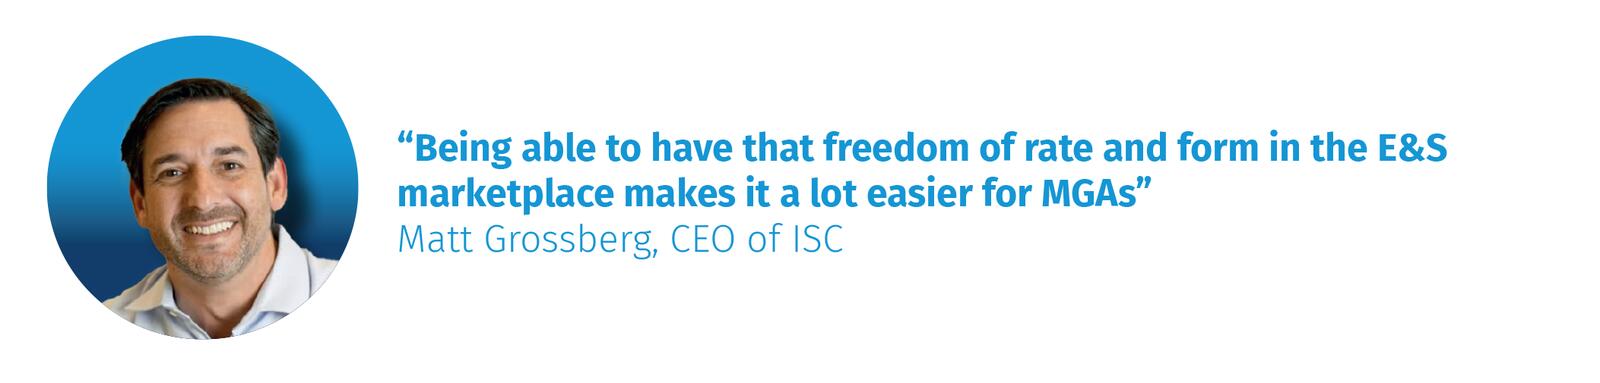 “Being able to have that freedom of rate and form in the E&S marketplace makes it a lot easier for MGAs” Matt Grossberg, CEO of ISC